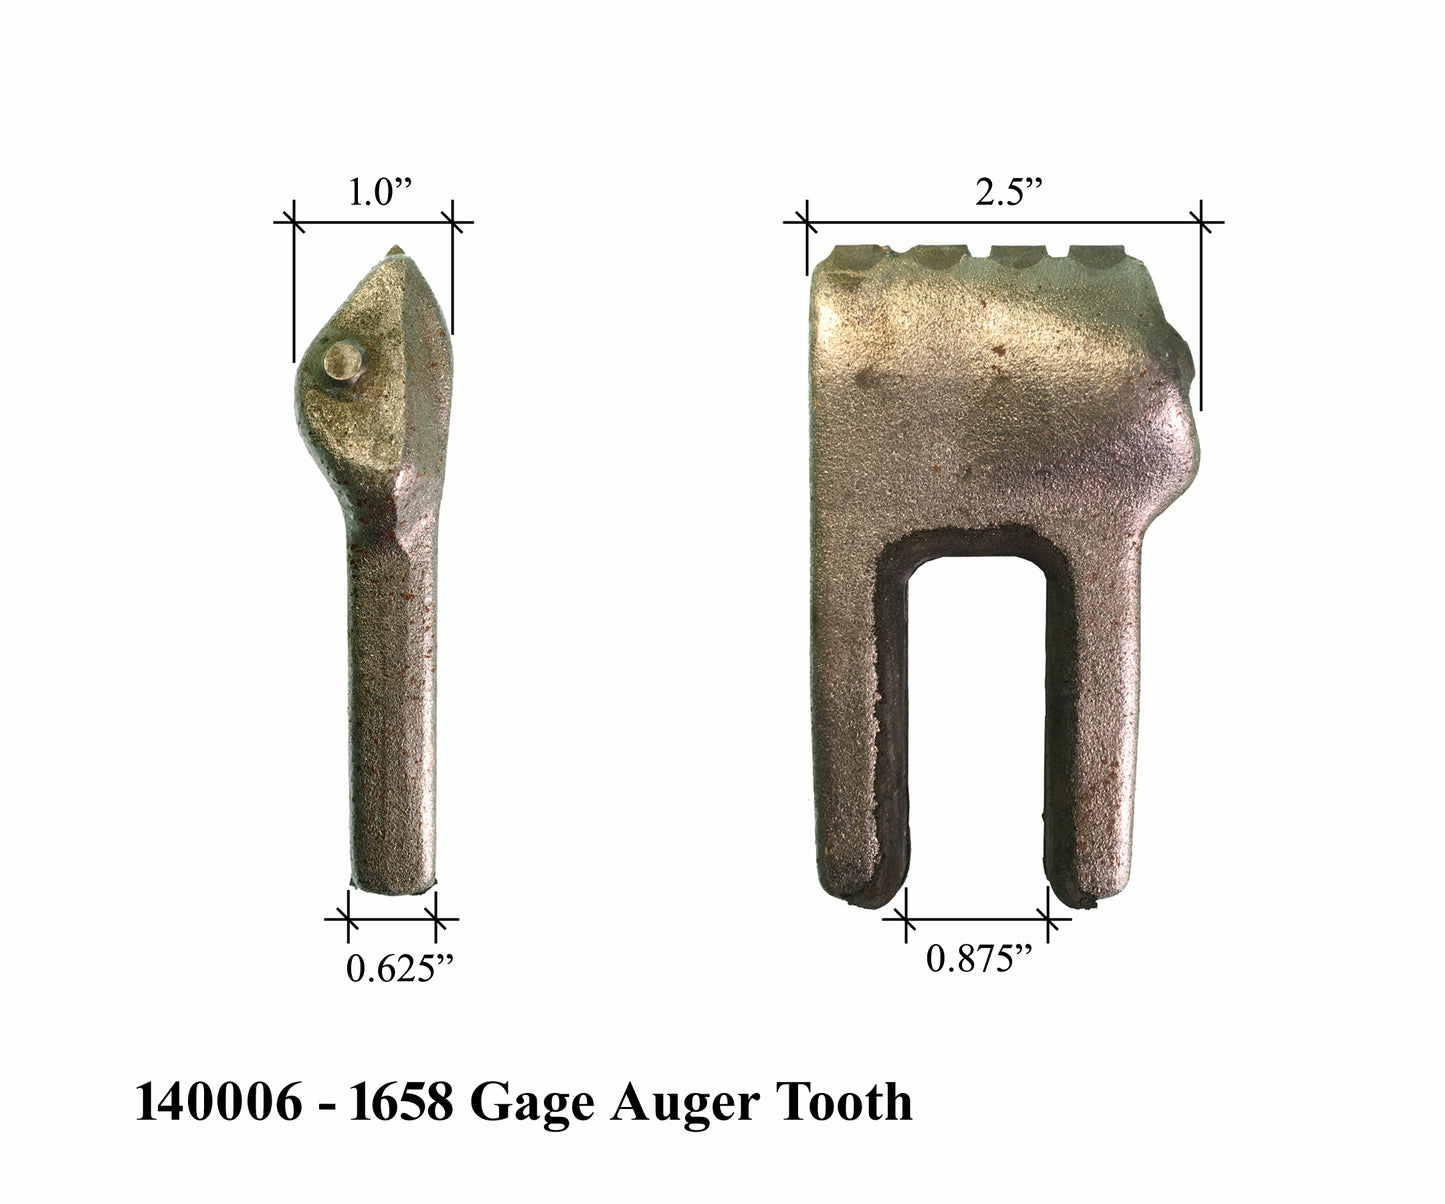 Pengo 1658 Fast Lock MD Utility Auger Gage Tooth, Carbide Insert - 140006